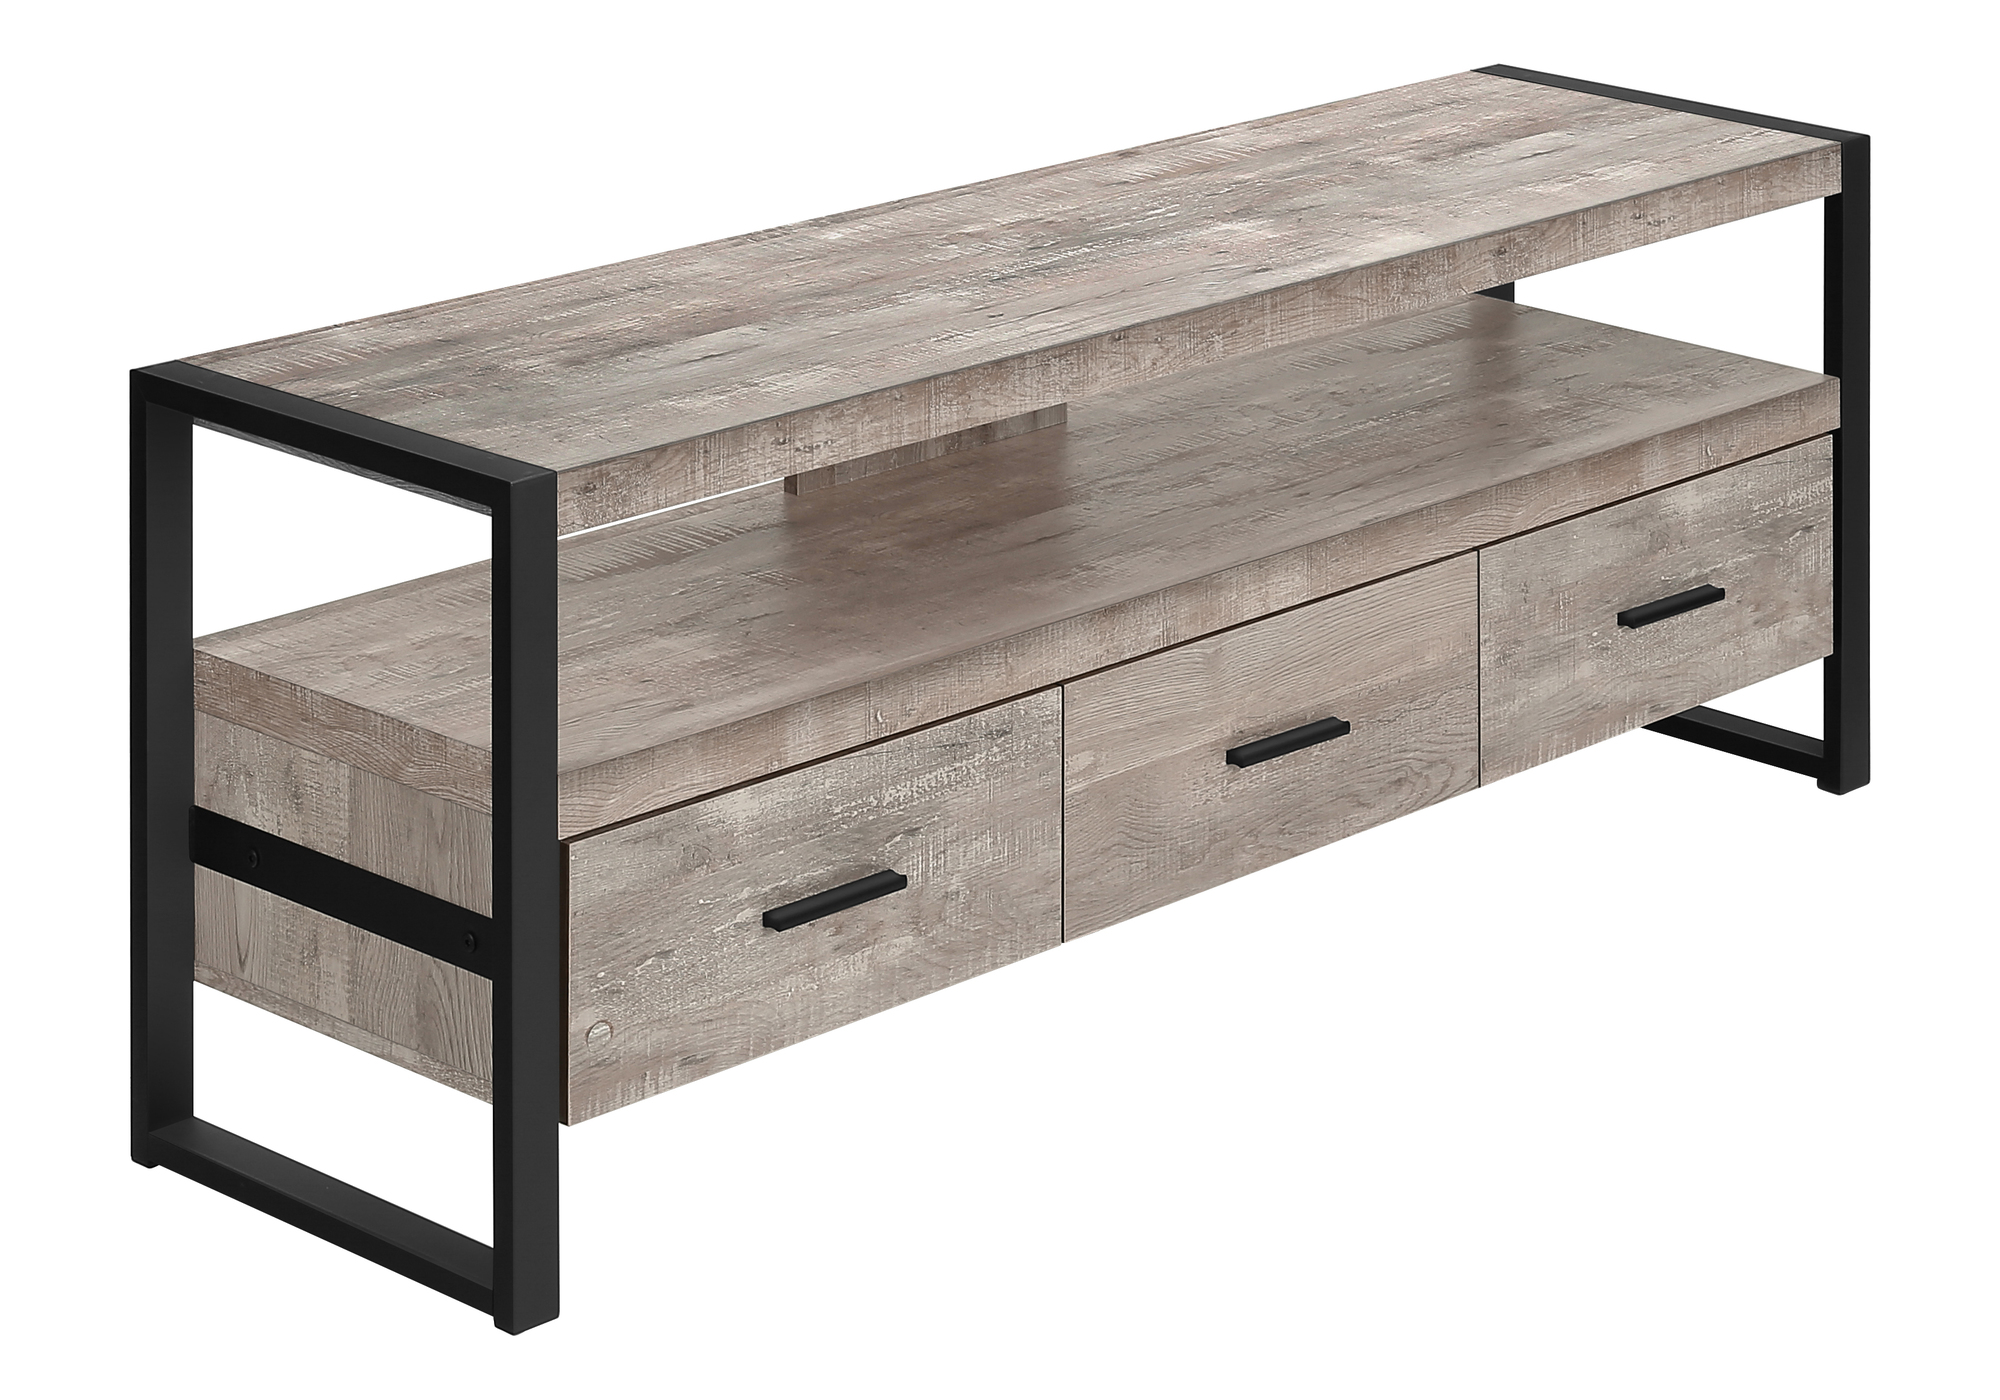 TV STAND - 60"L / TAUPE RECLAIMED WOOD-LOOK / 3 DRAWERS